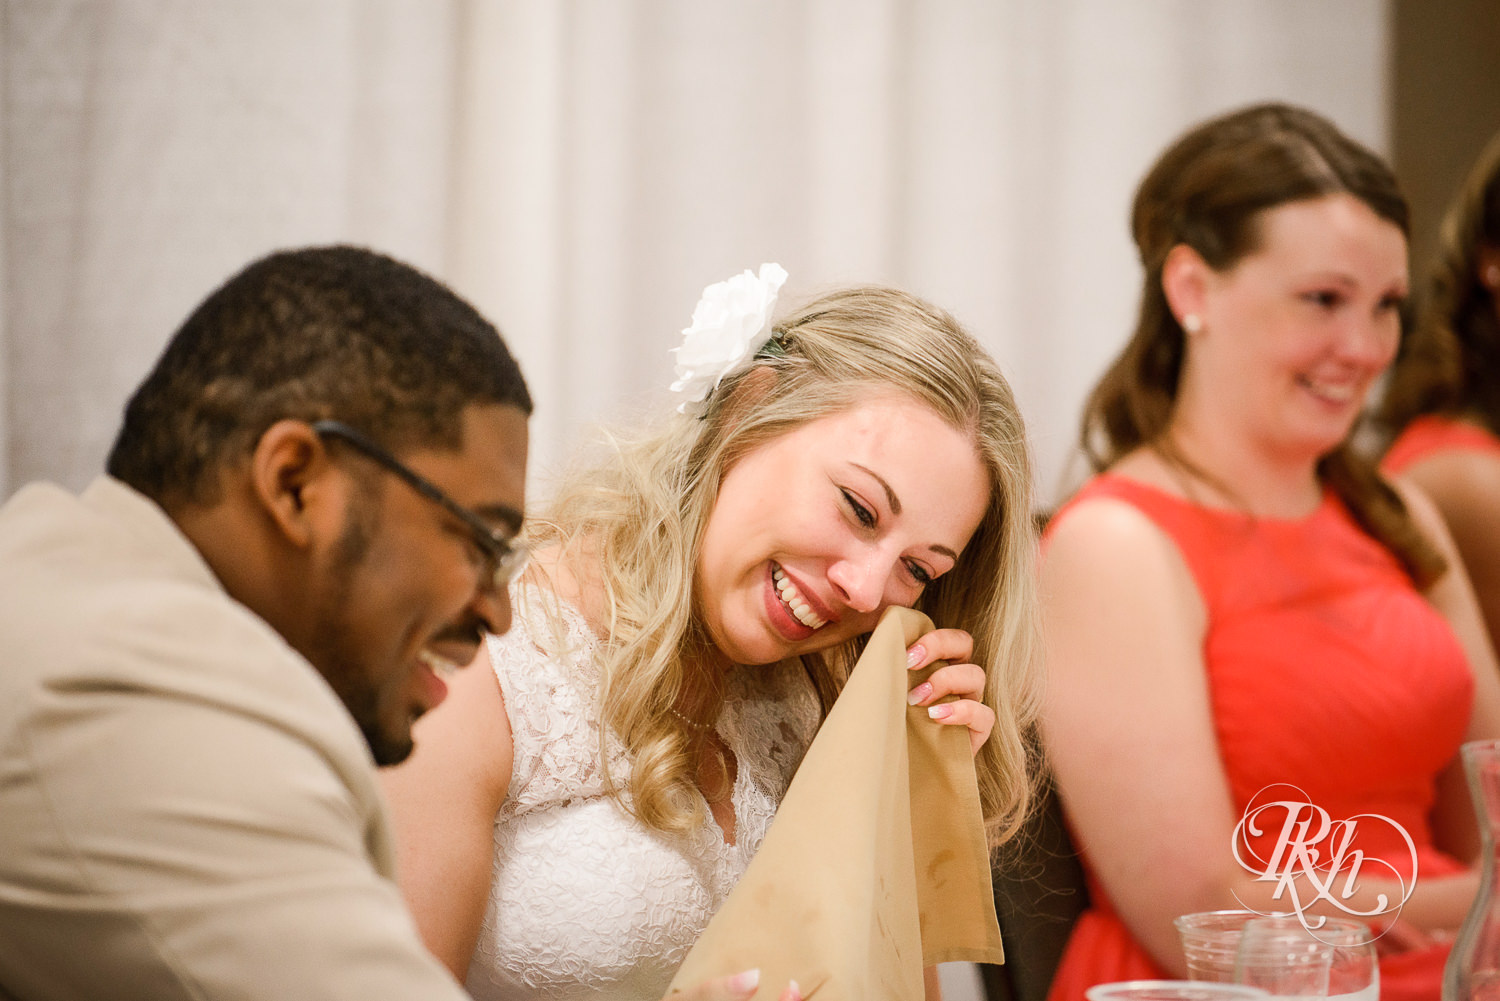 White bride and black groom smile during wedding reception at North Metro Event Center in Shoreview, Minnesota.